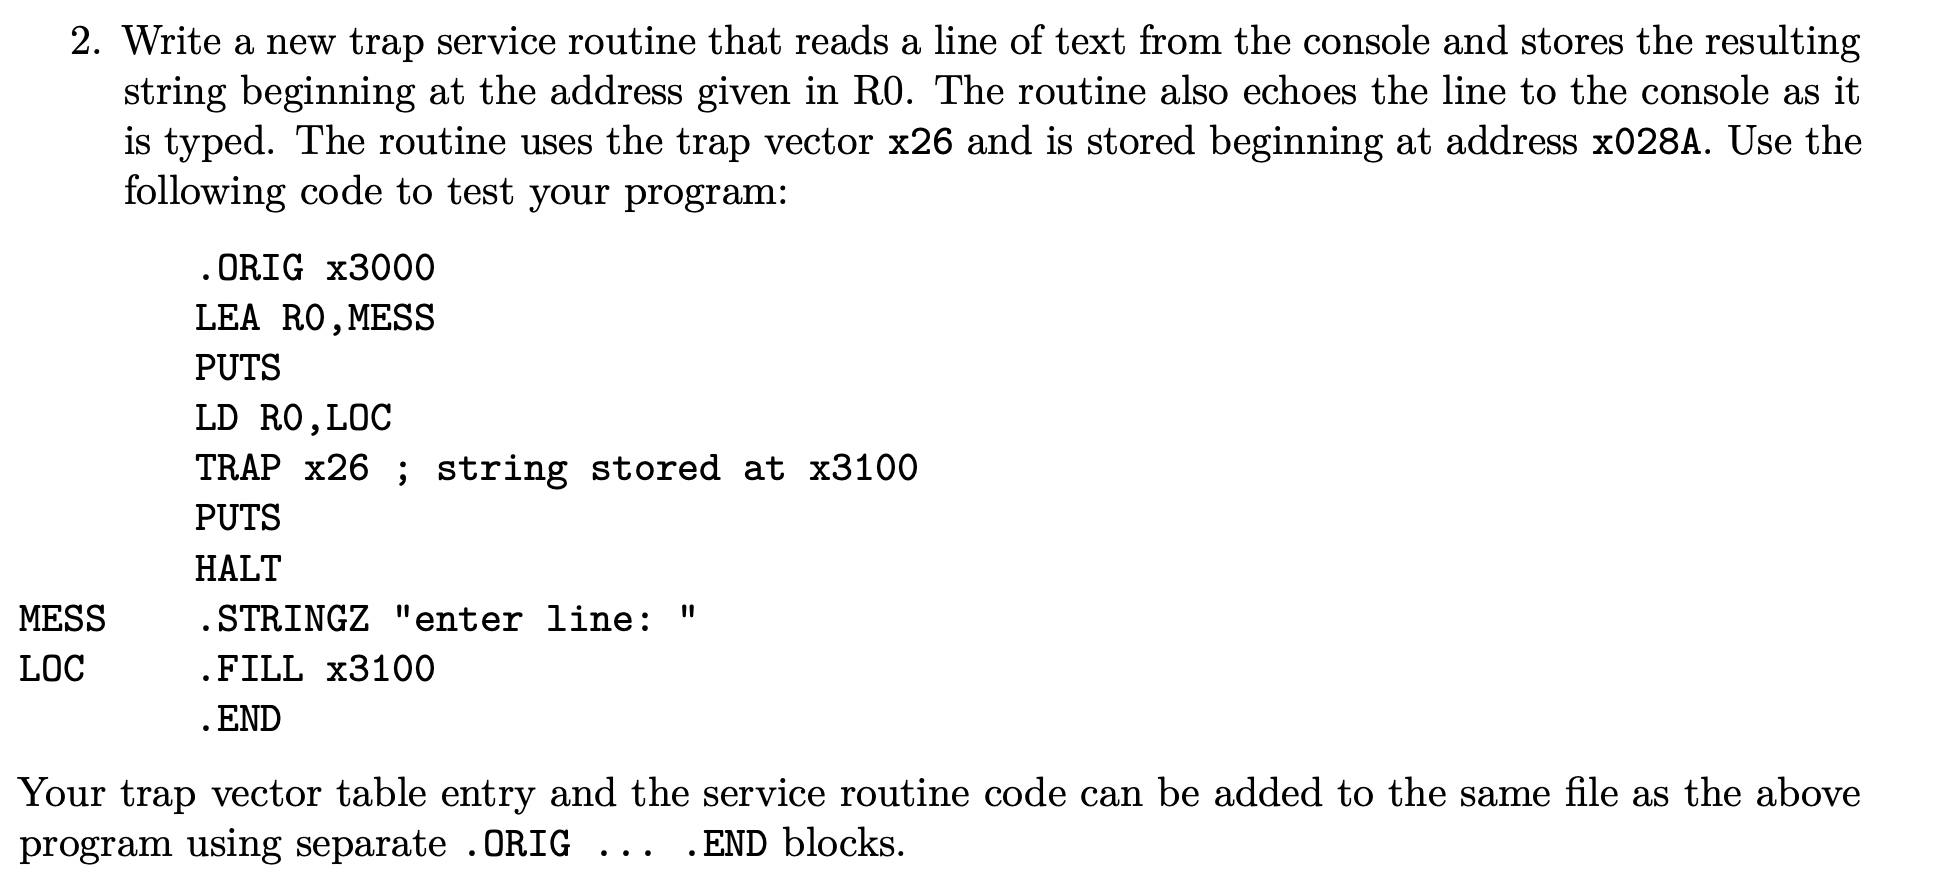 2. Write a new trap service routine that reads a line of text from the console and stores the resulting